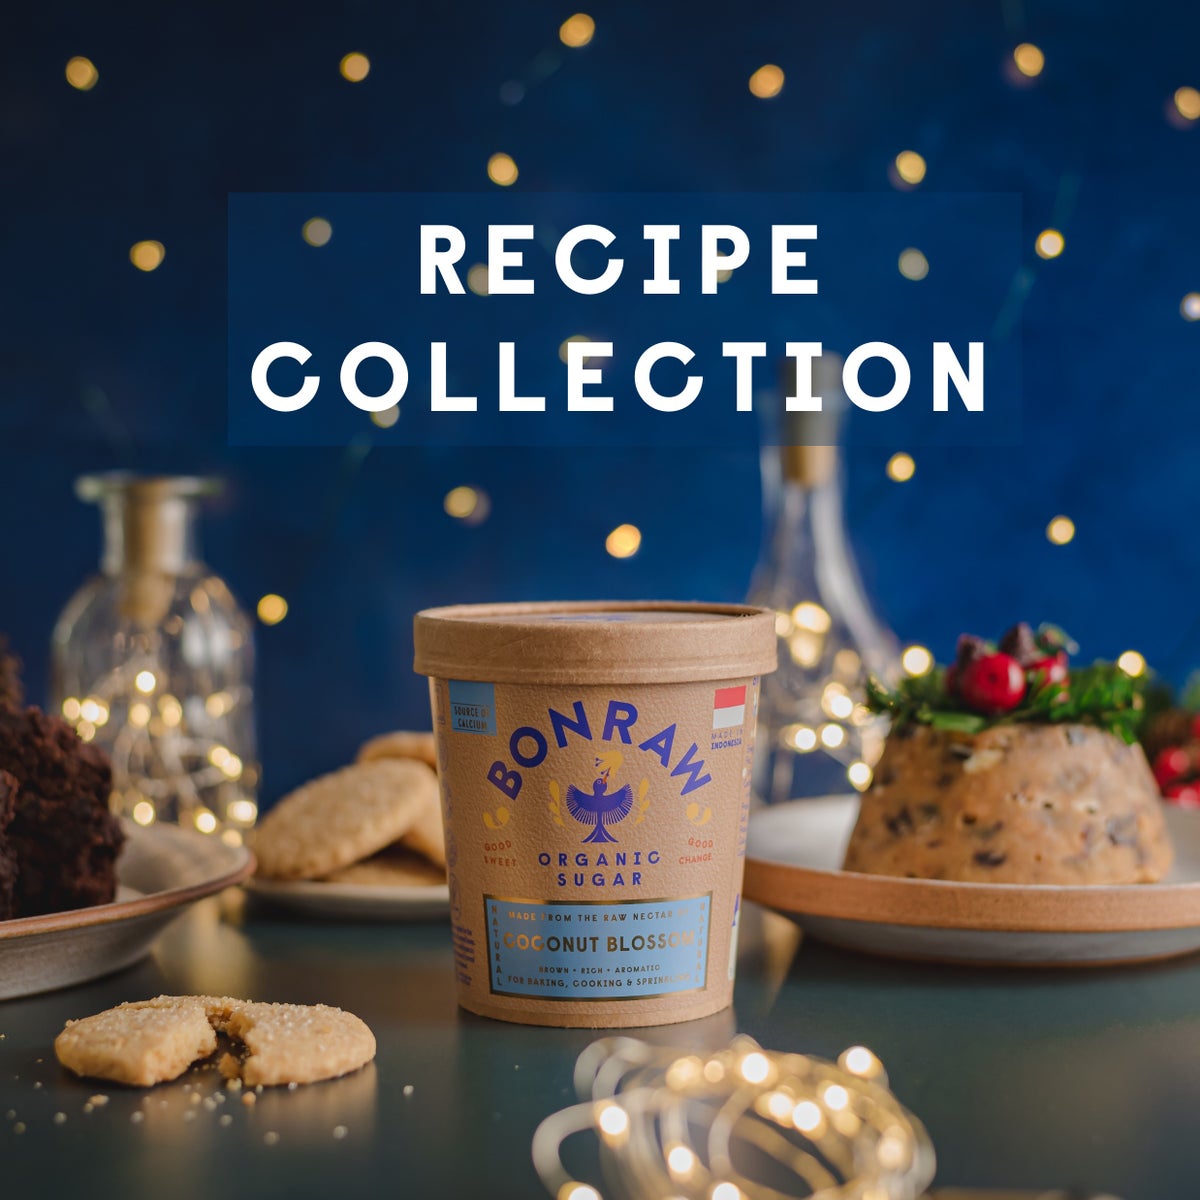 Recipe collection.